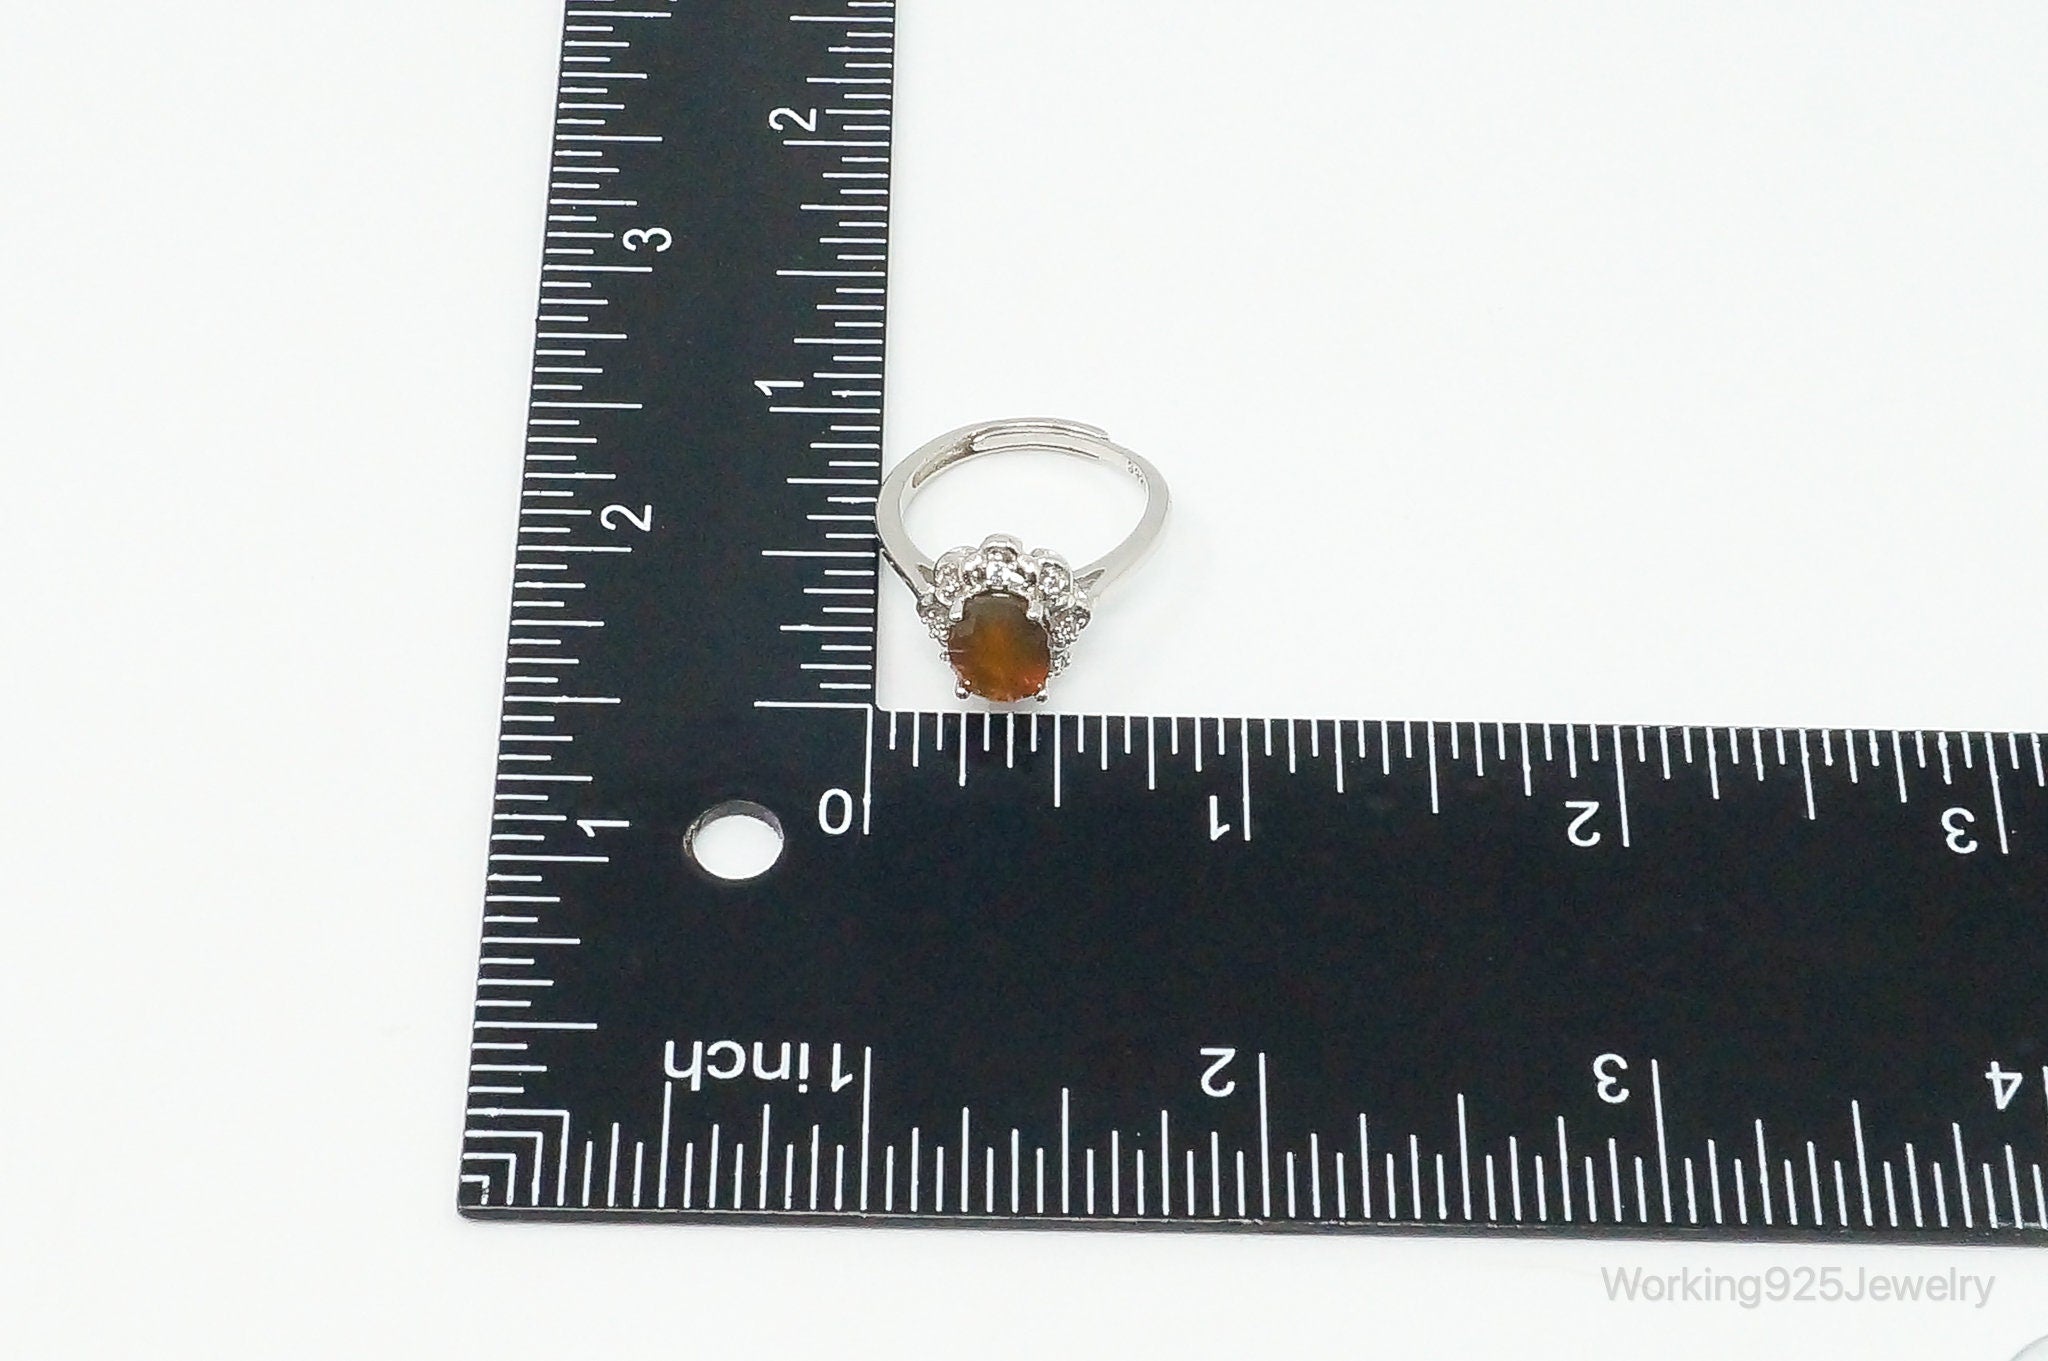 Carnelian Cubic Zirconia Sterling Silver Ring - Size 6.5 Adjustable